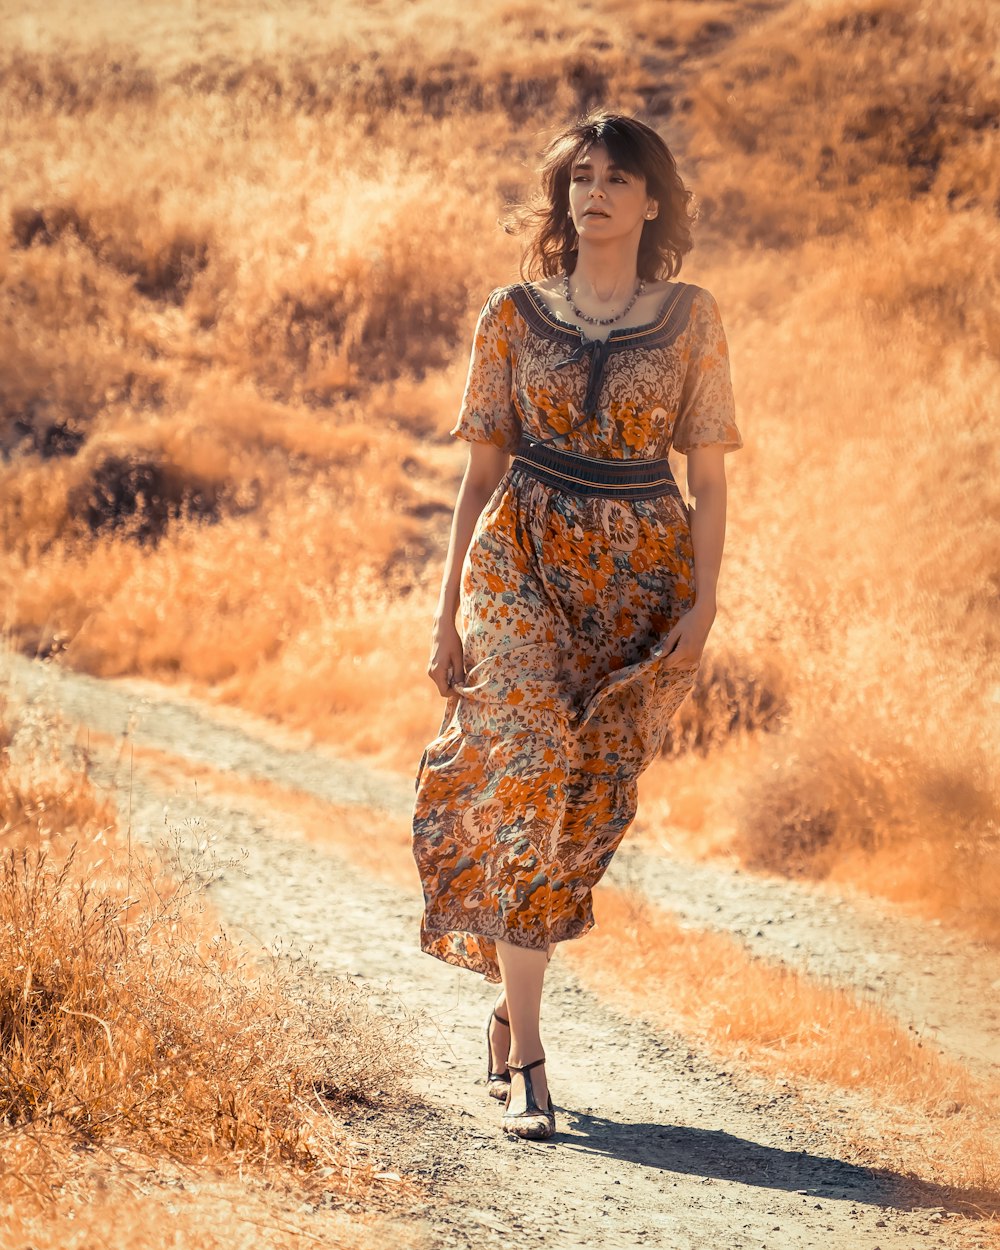 woman in brown and black floral dress standing on dirt road during daytime